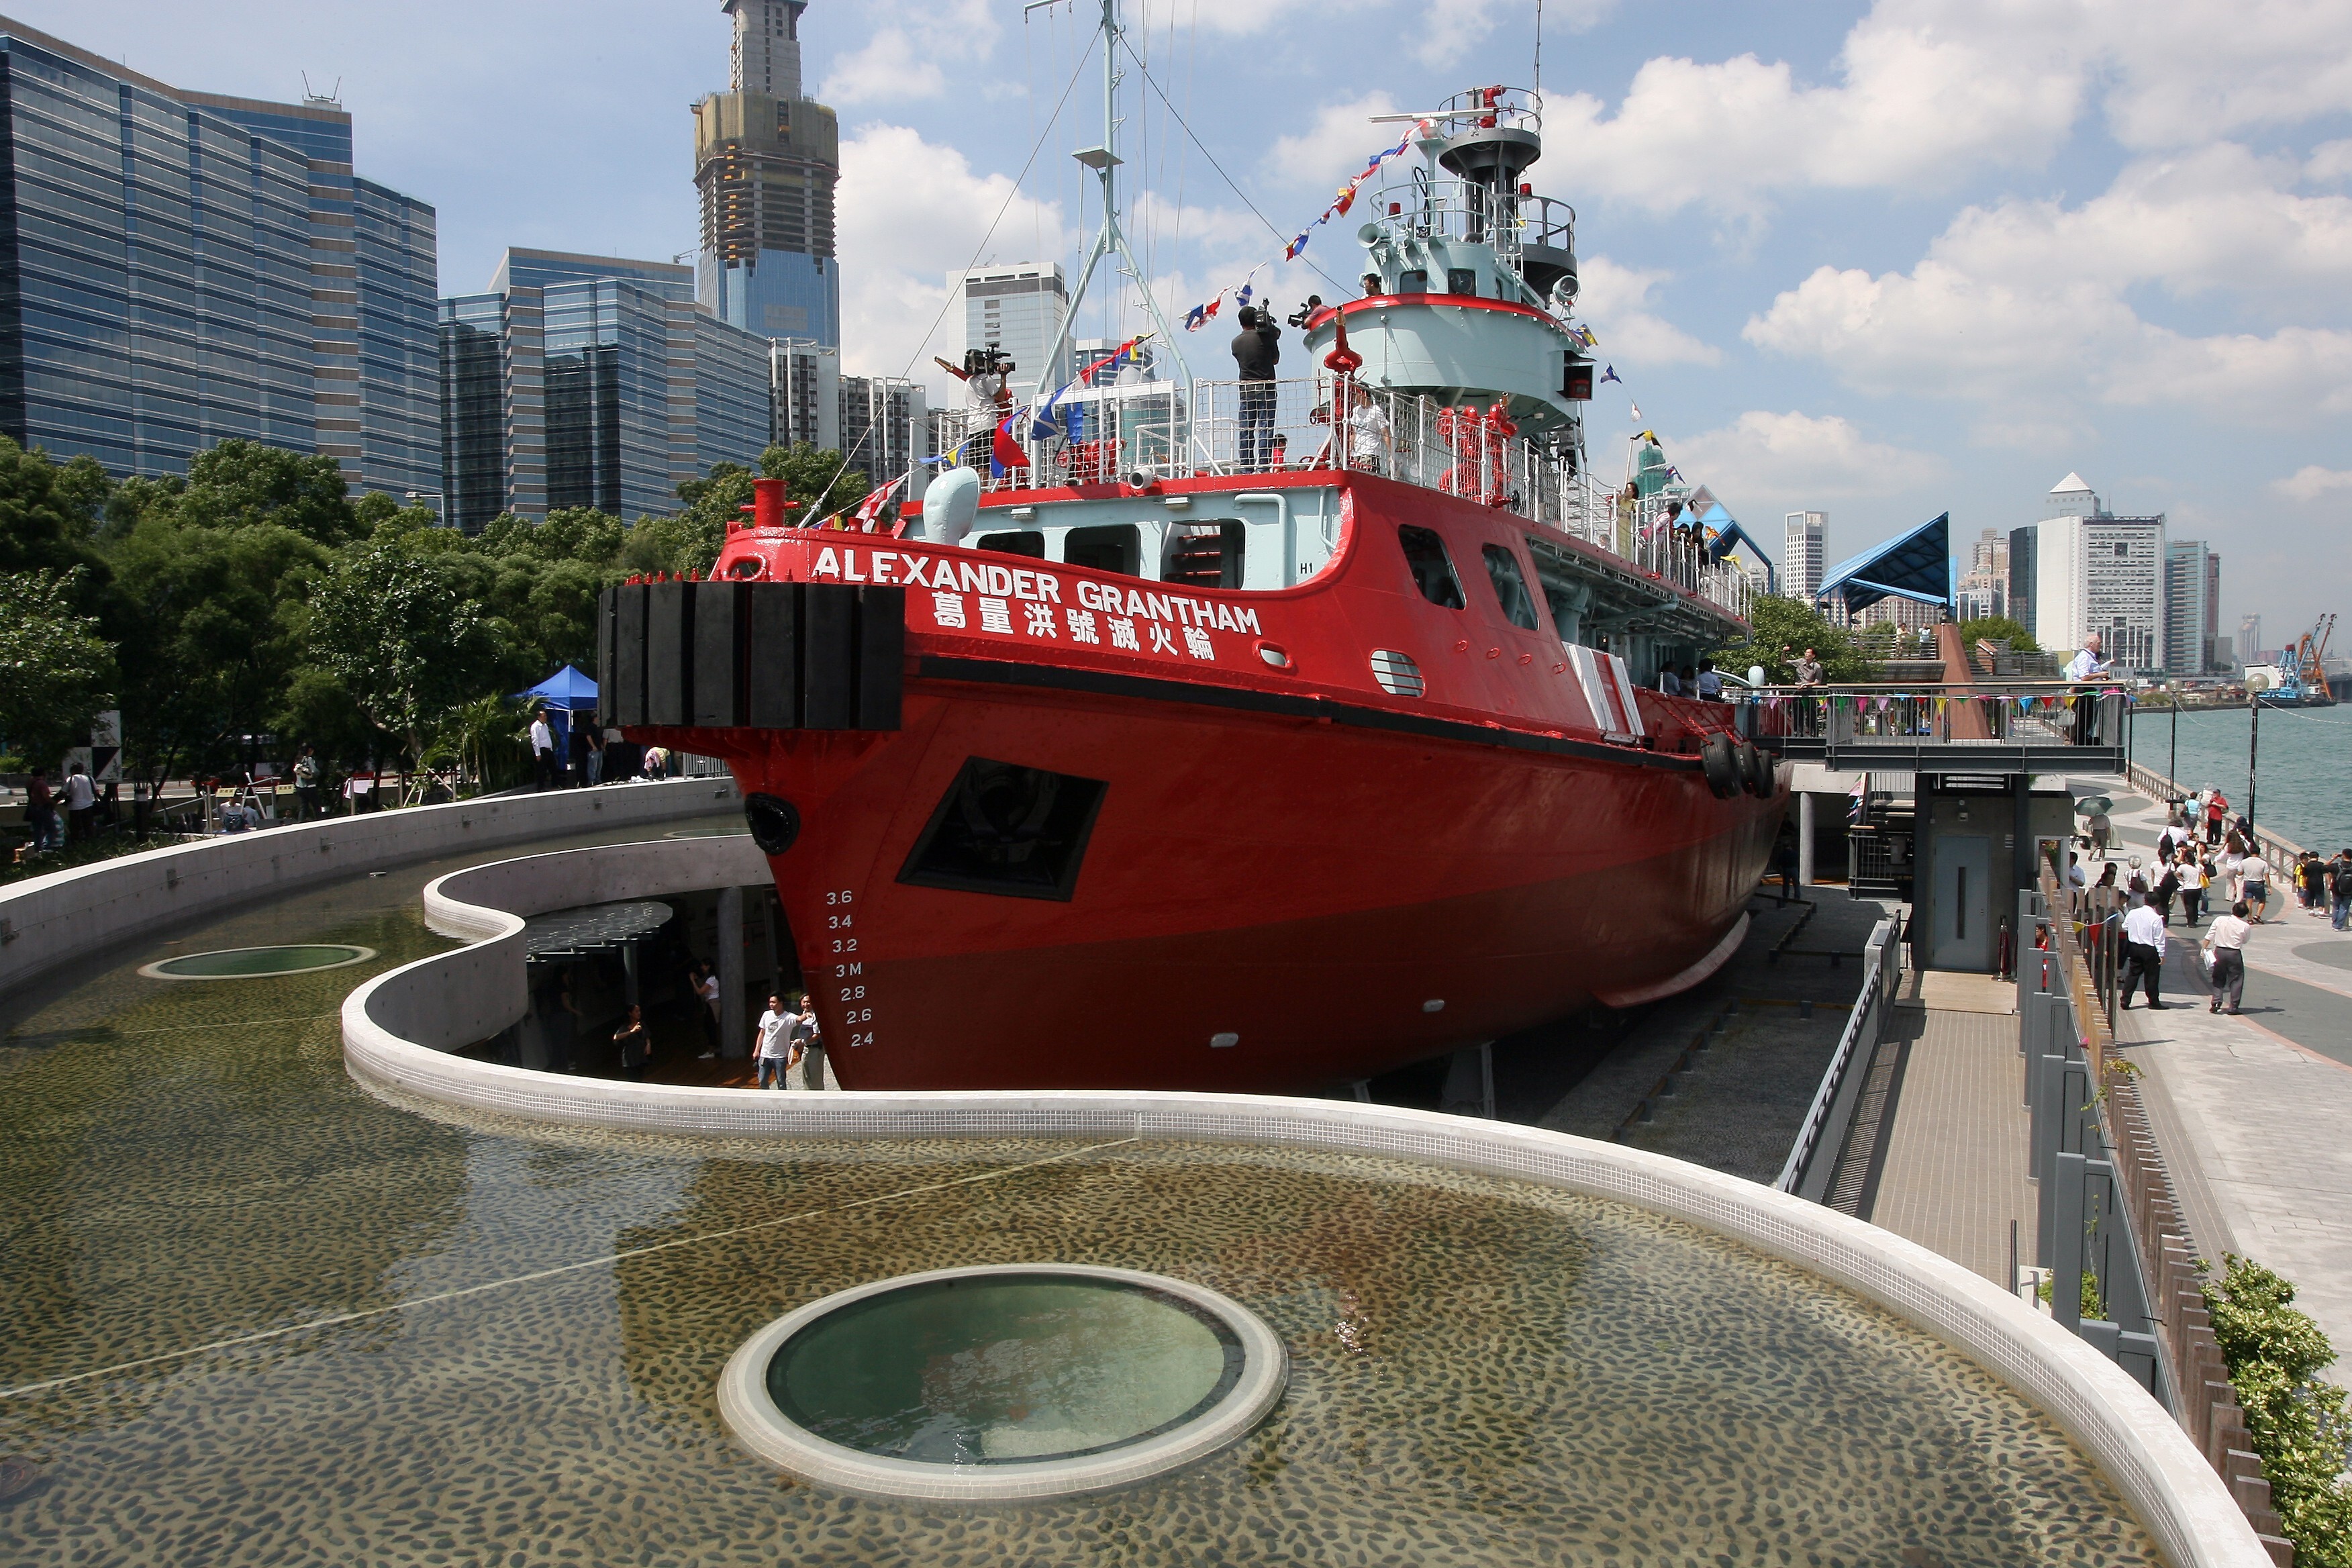 The “Fireboat Alexander Grantham Exhibition Gallery” on its official opening day, in Quarry Bay Park in September 2007. The vessel had served for nearly 50 years as the flagship of the Hong Kong Fire Services Department’s fireboat team, responding to alarms and conducting rescue operations both in Hong Kong waters and along the shoreline. The recently retired Flores jetfoil could be an equally attractive waterfront installation. Photo: Martin Chan